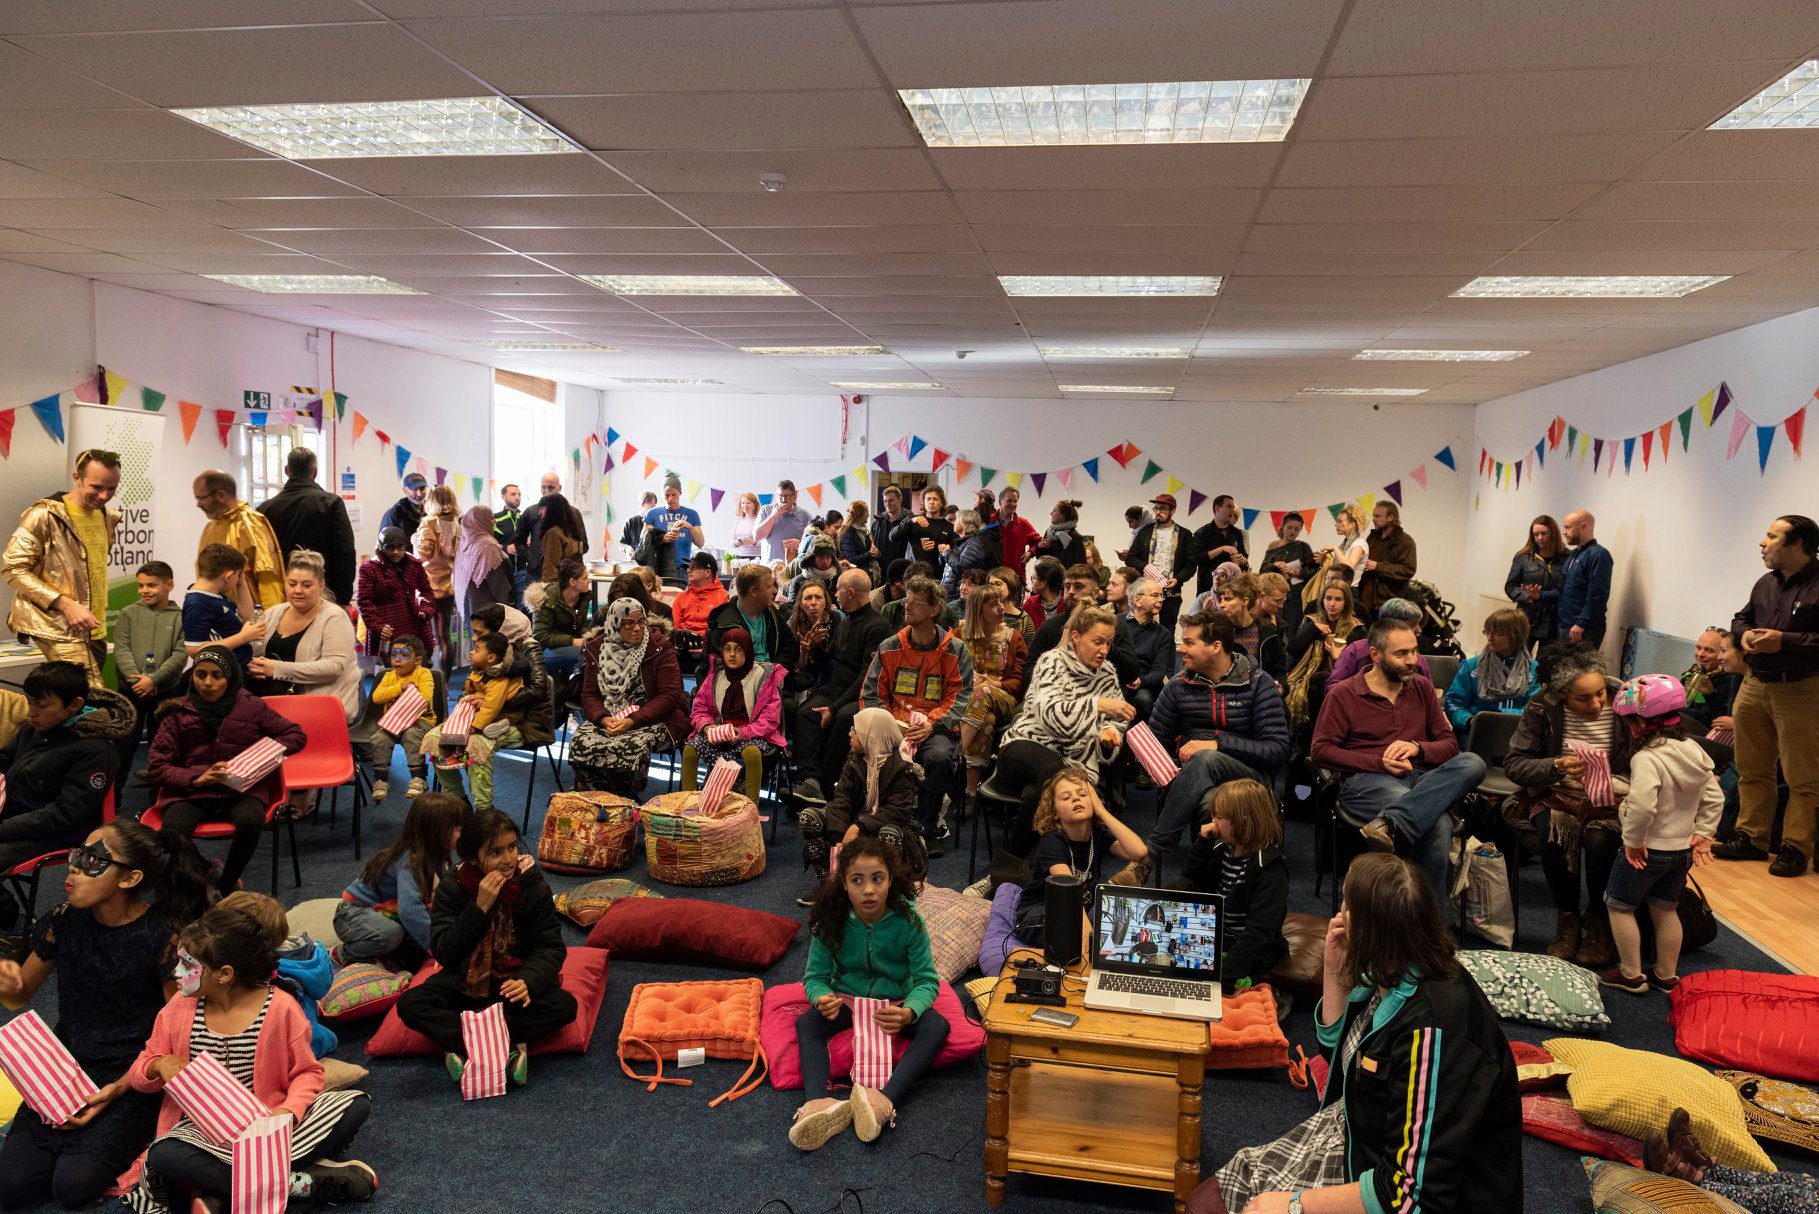 A large room is full of people of different ages, people are sat on the floor, as well as being stood or sat on chairs. In the foreground young children are eating popcorn out of paper bags. Around the room decorative bunting is hung on the walls. 